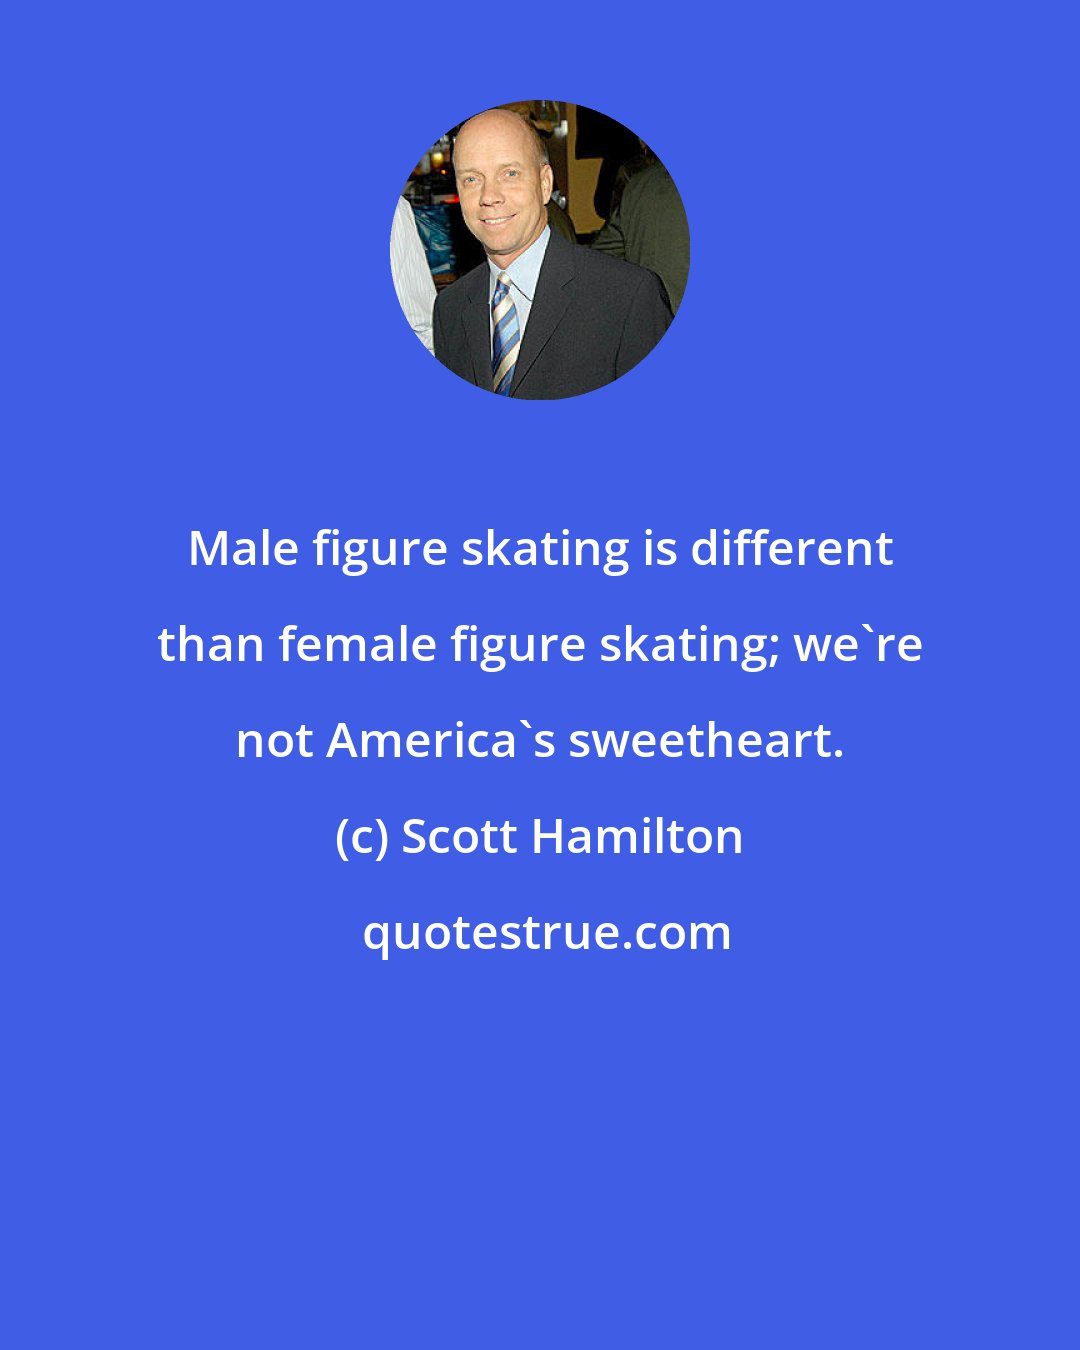 Scott Hamilton: Male figure skating is different than female figure skating; we're not America's sweetheart.